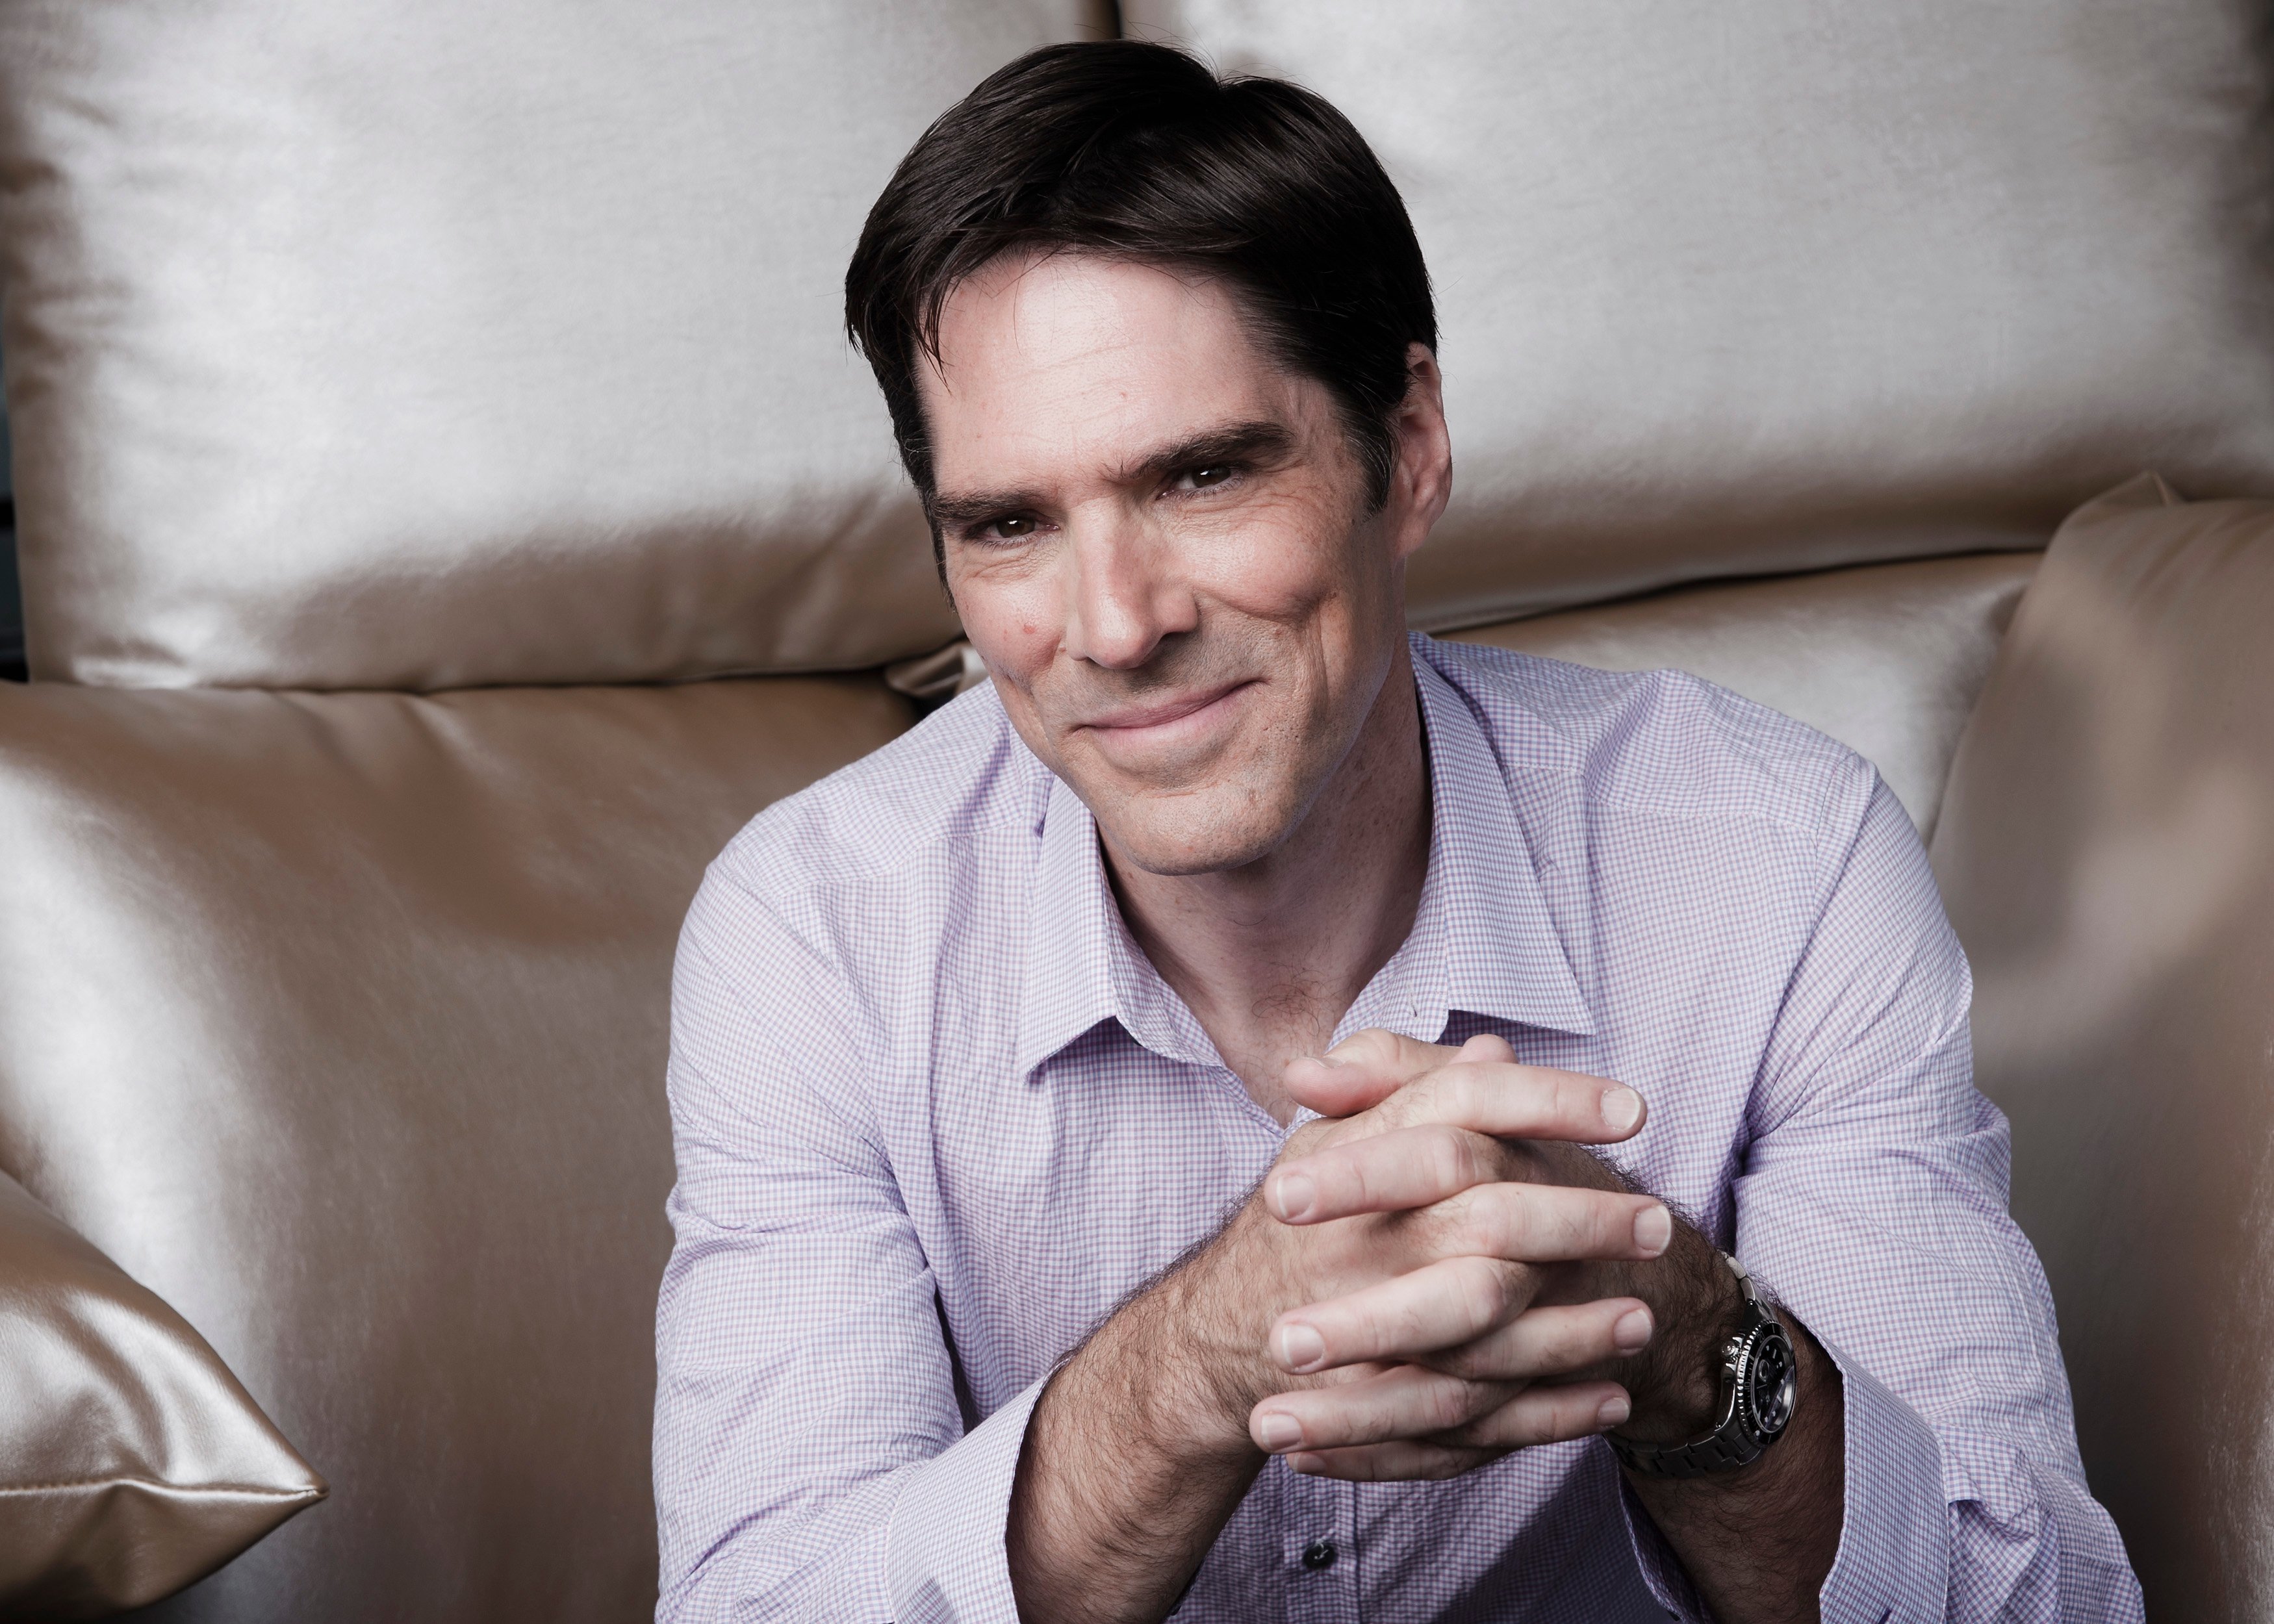 Criminal Minds' Lead Actor Thomas Gibson Fired After On Set Incident